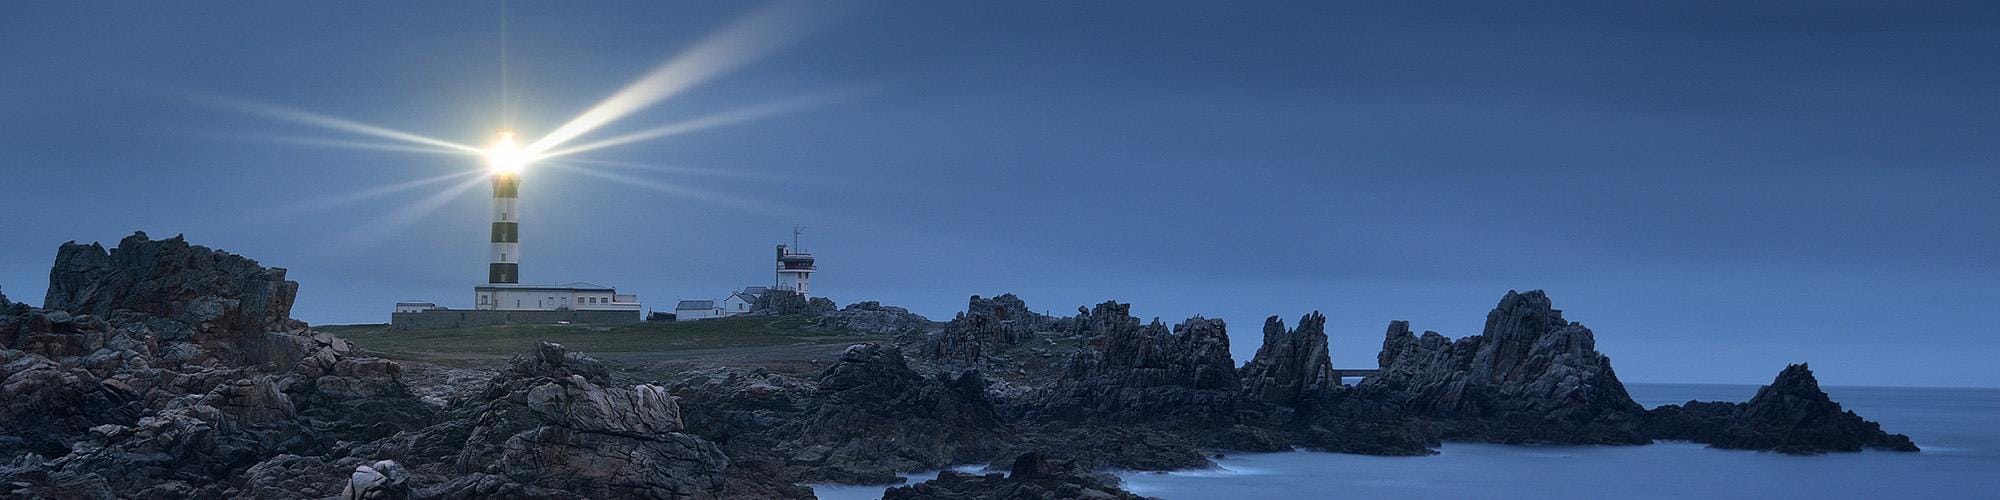 Ouessant Lighthouse in Brittany